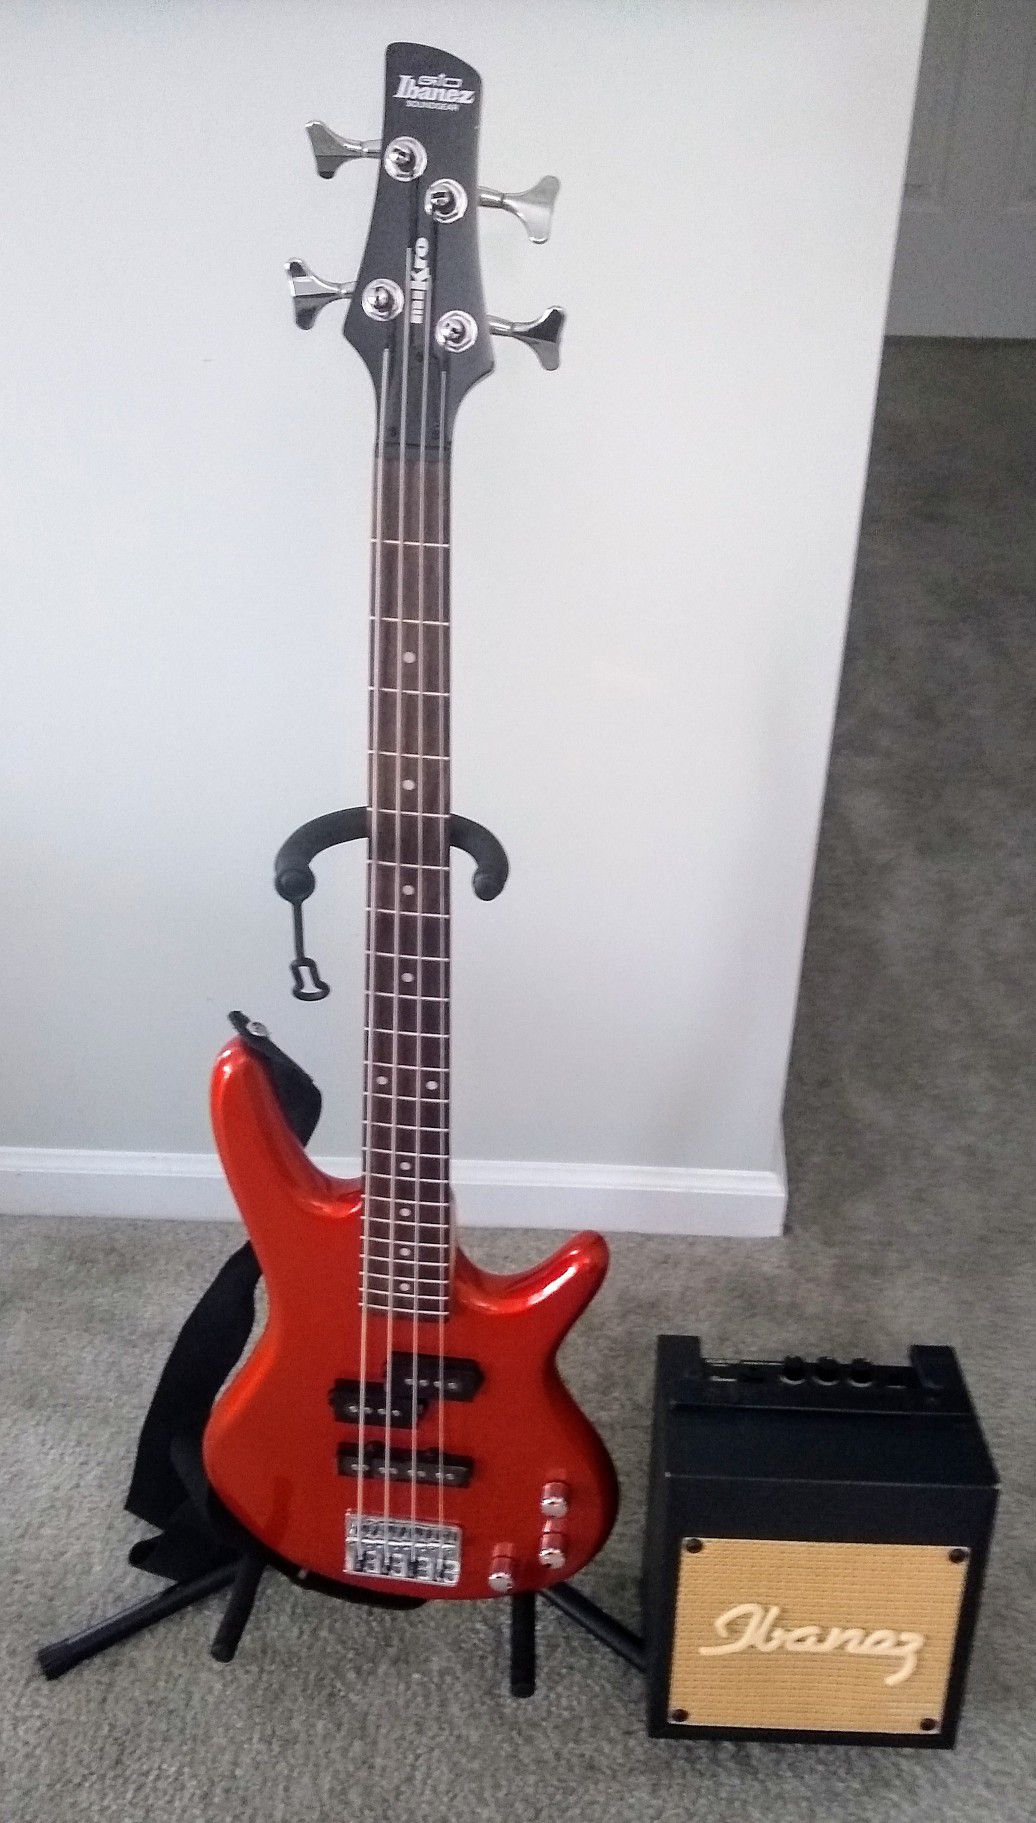 Bass Ibanez Gio Mikro with amplifier Ibanez Aca15T and original bag